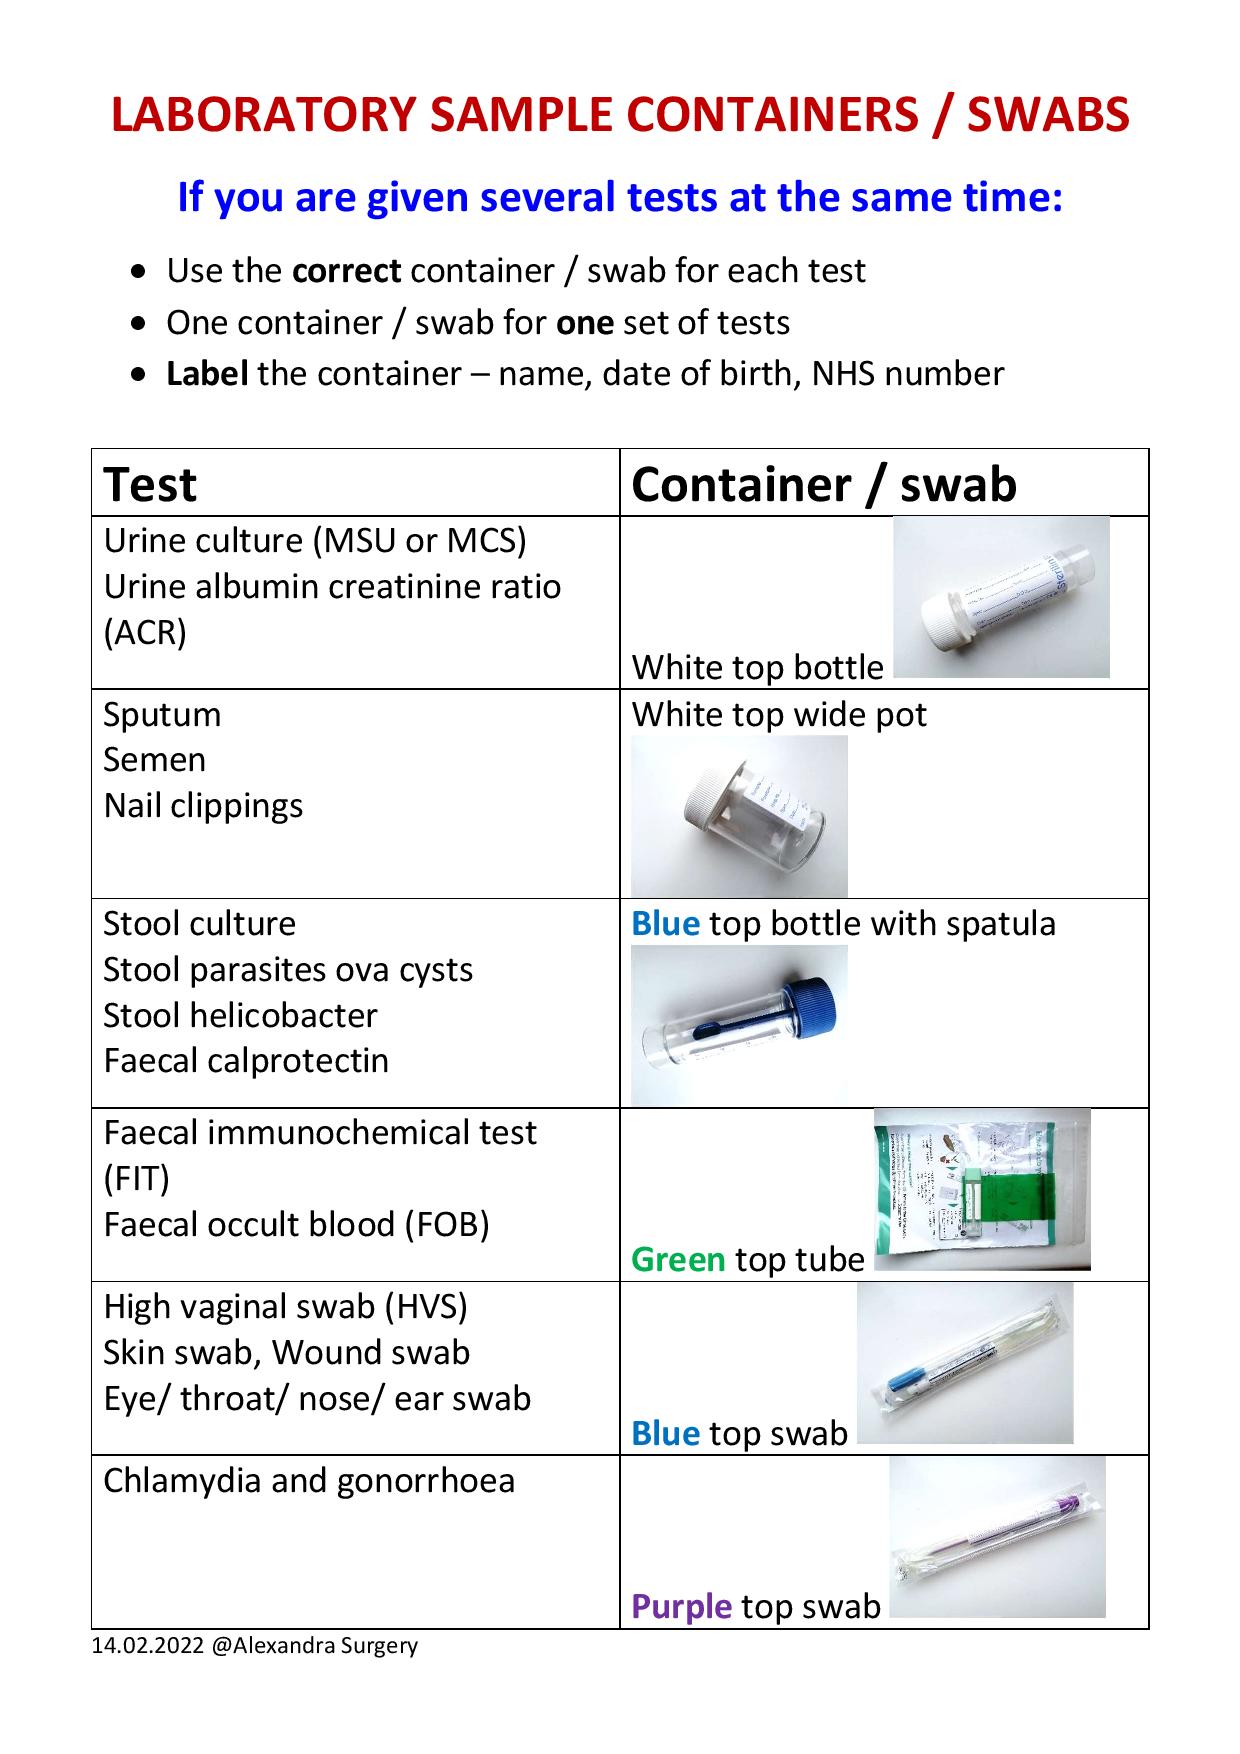 Laboratory contianers and swabs